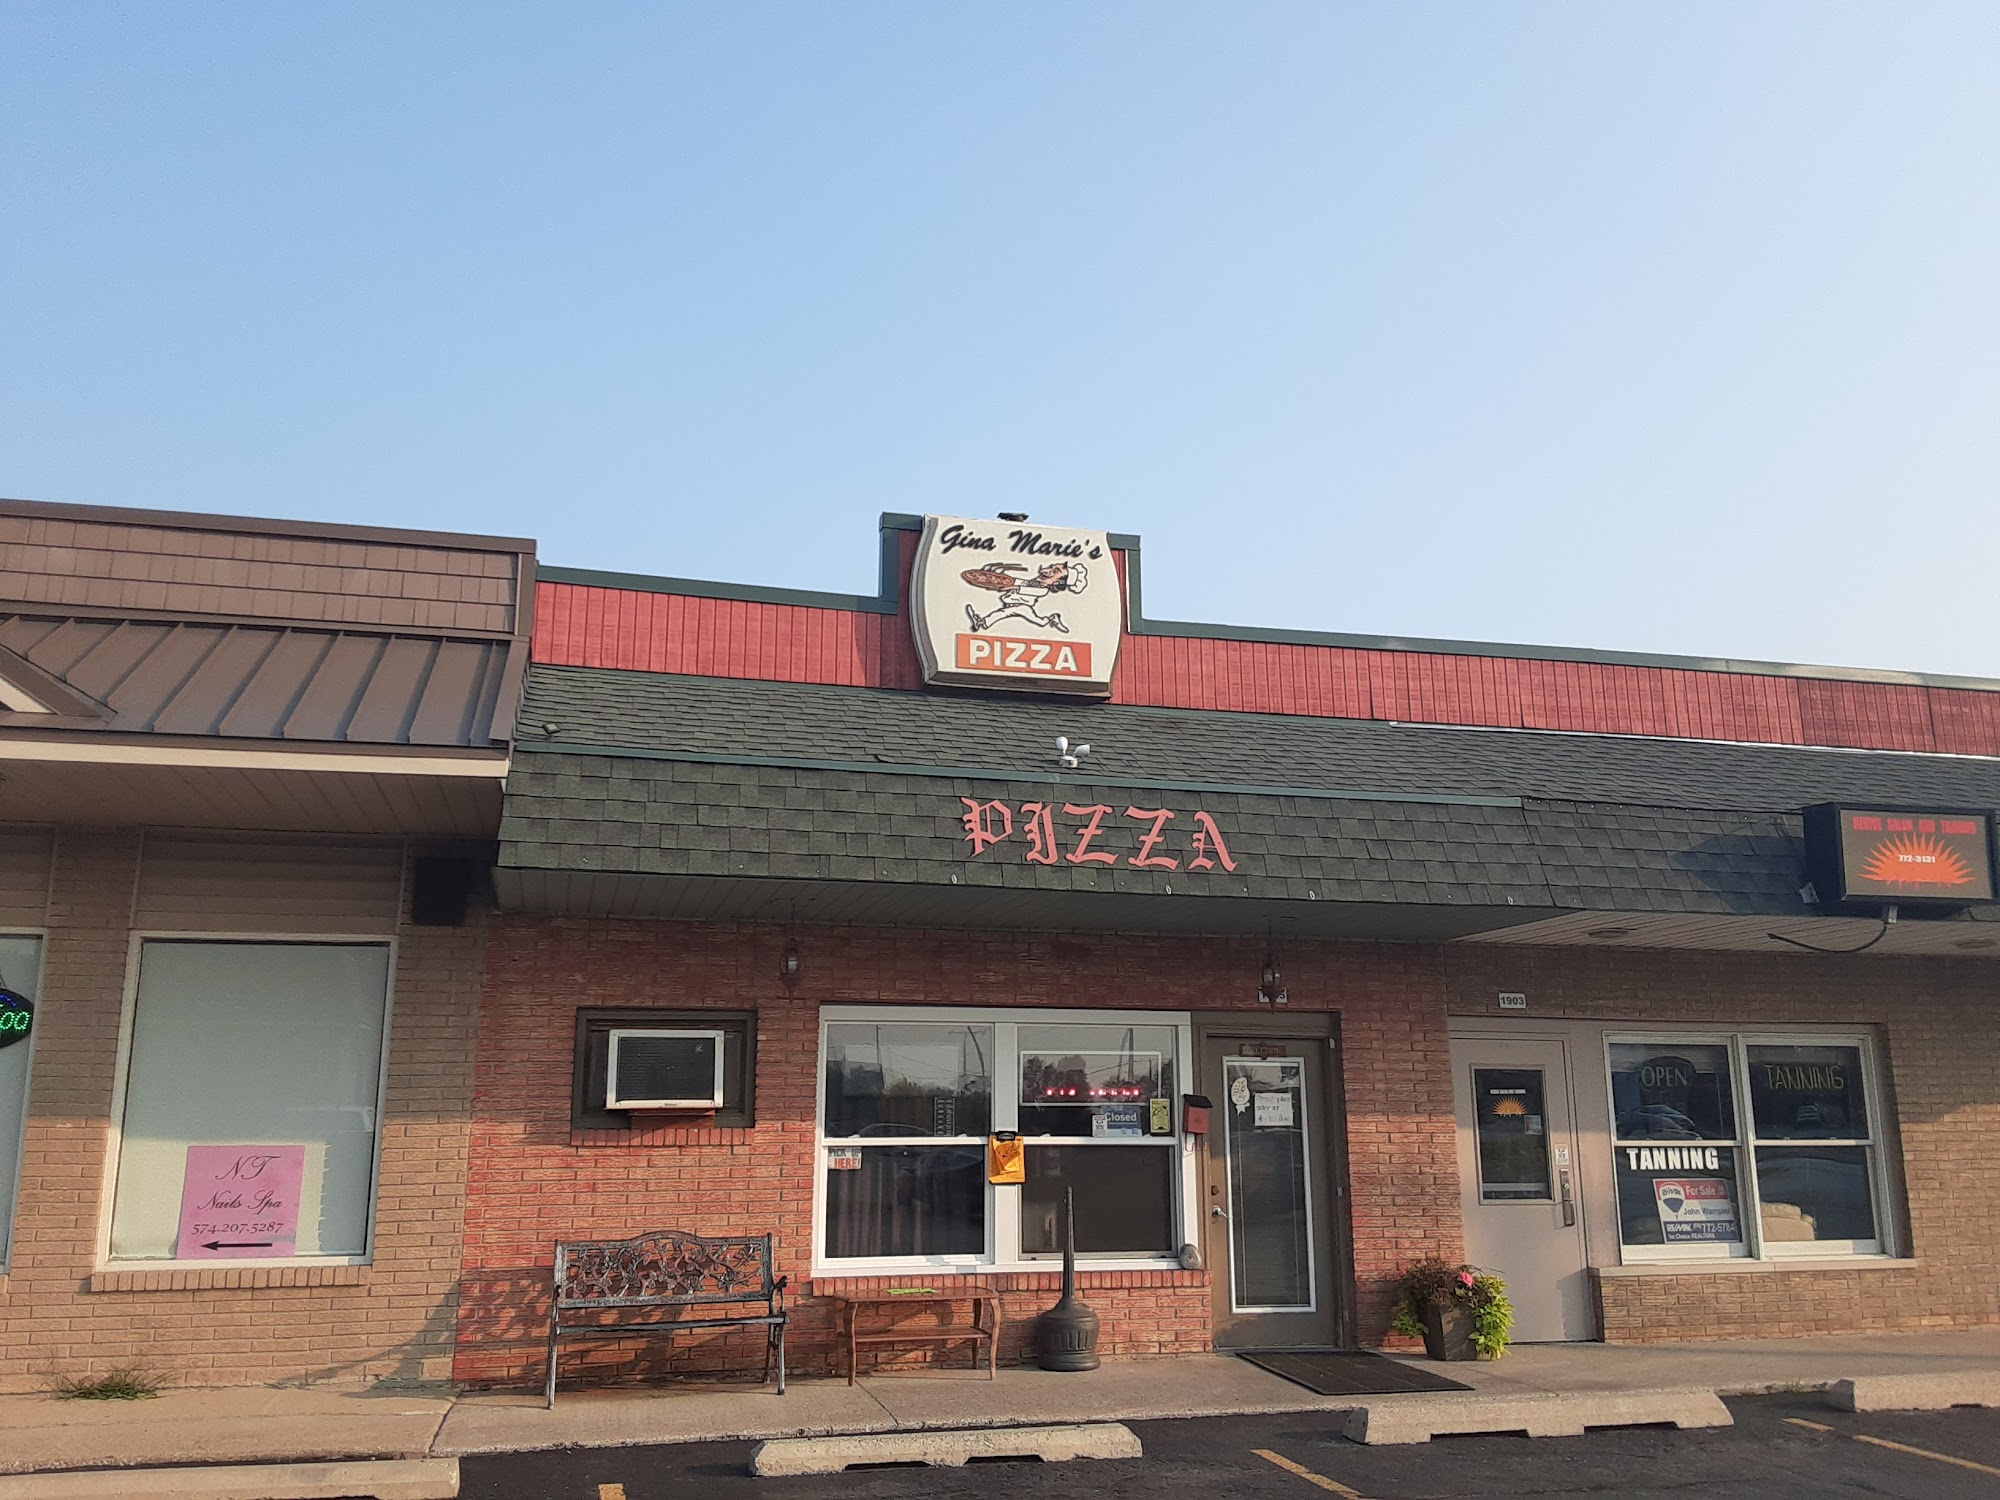 Gina Marie's pizza